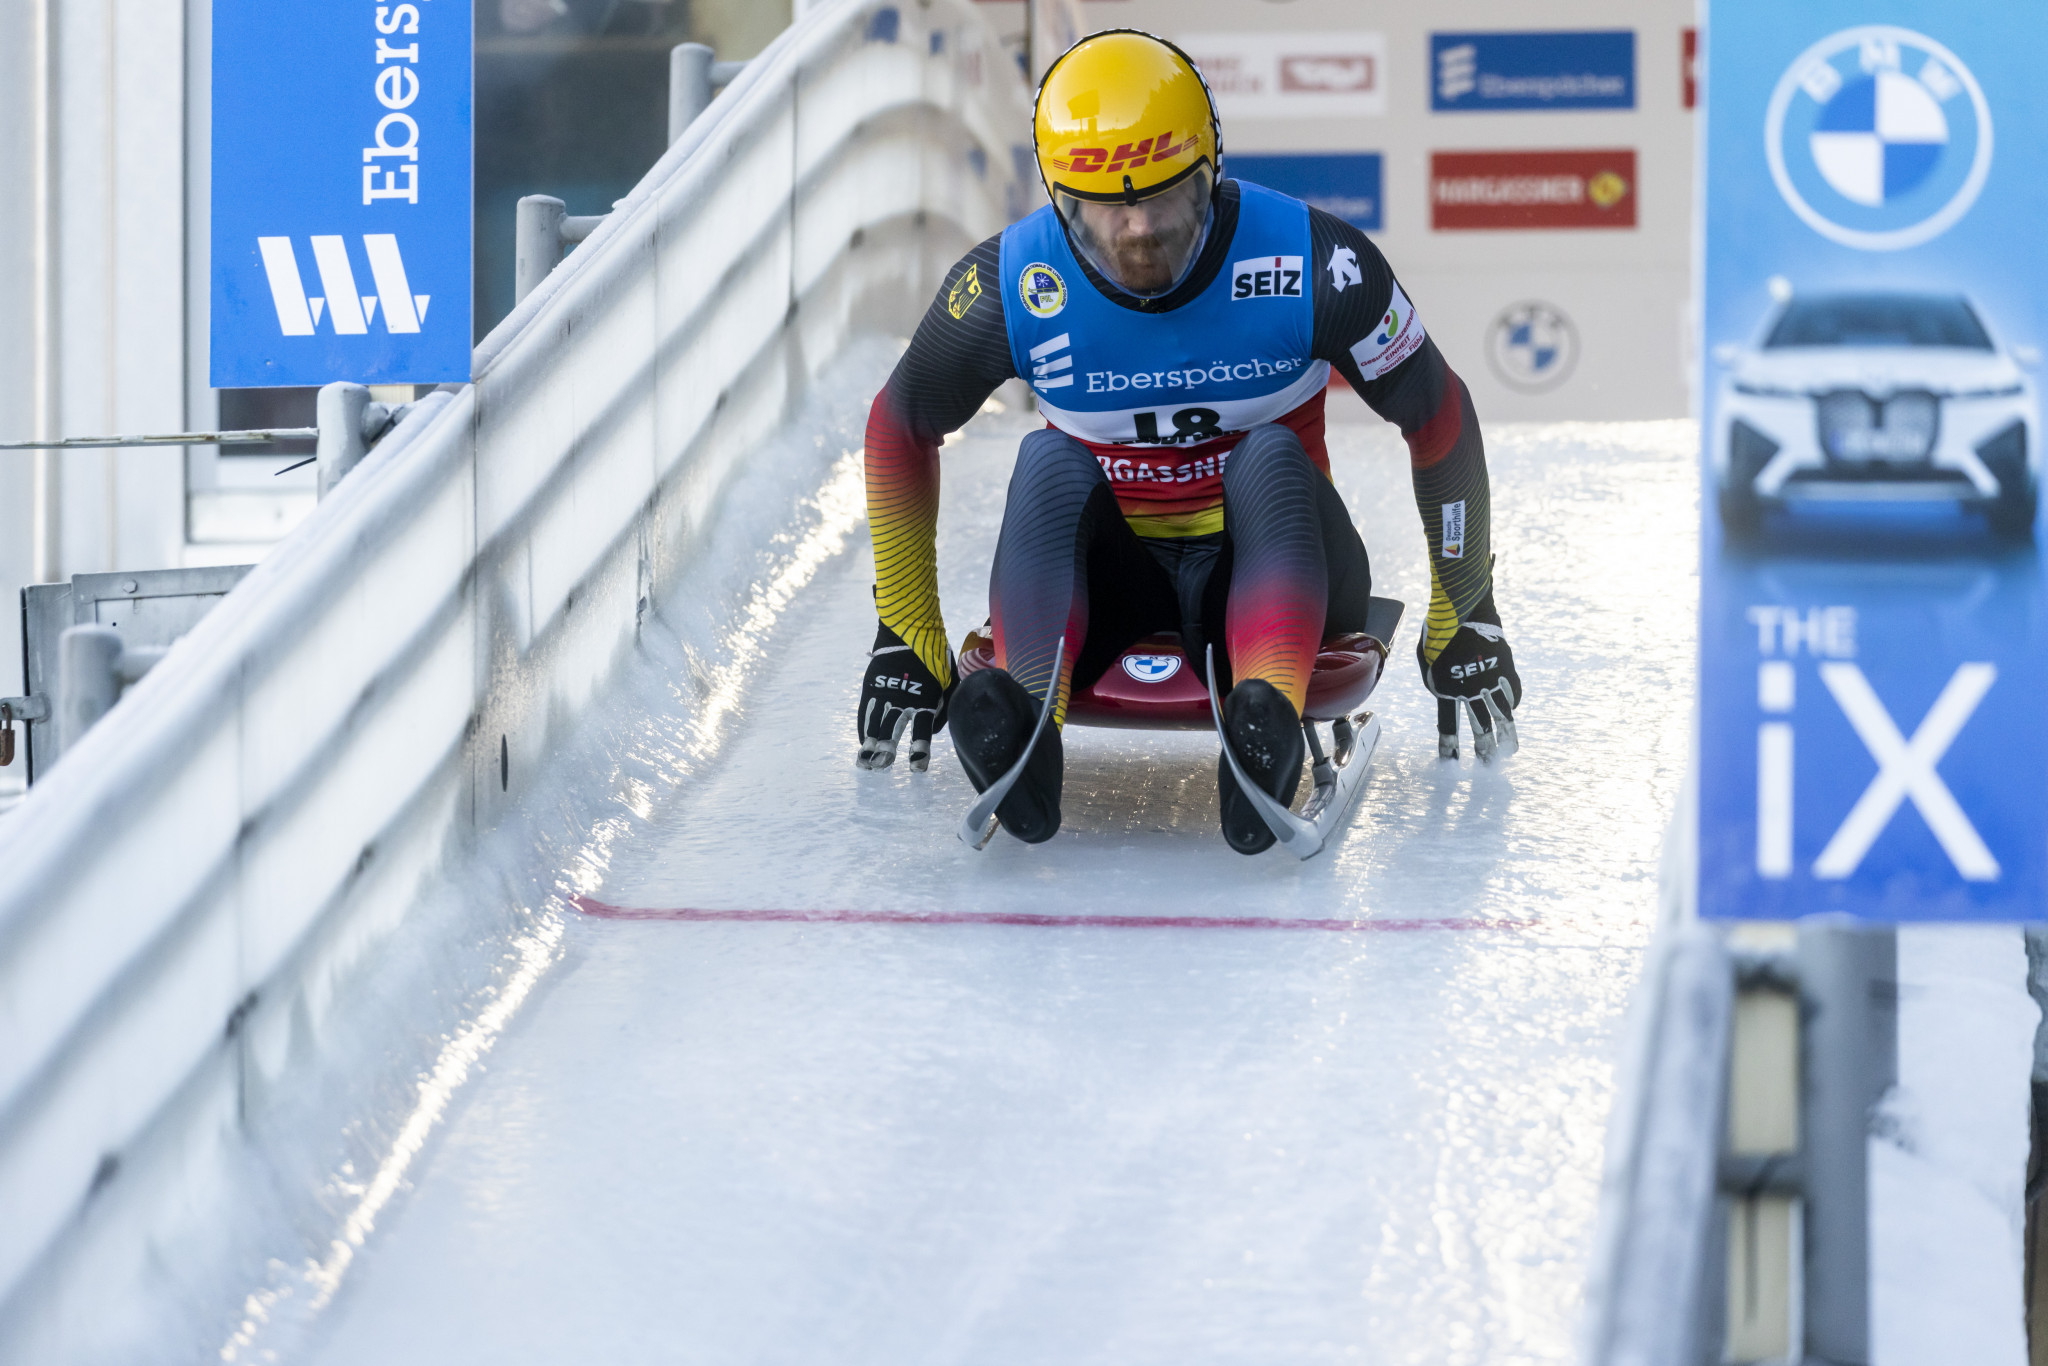 Germany’s Chris Eissler was one of the winners of the International Luge Federation Fair-Play Prize for their "unique gesture of fairness" during the 2021-2022 luge season ©Getty Images